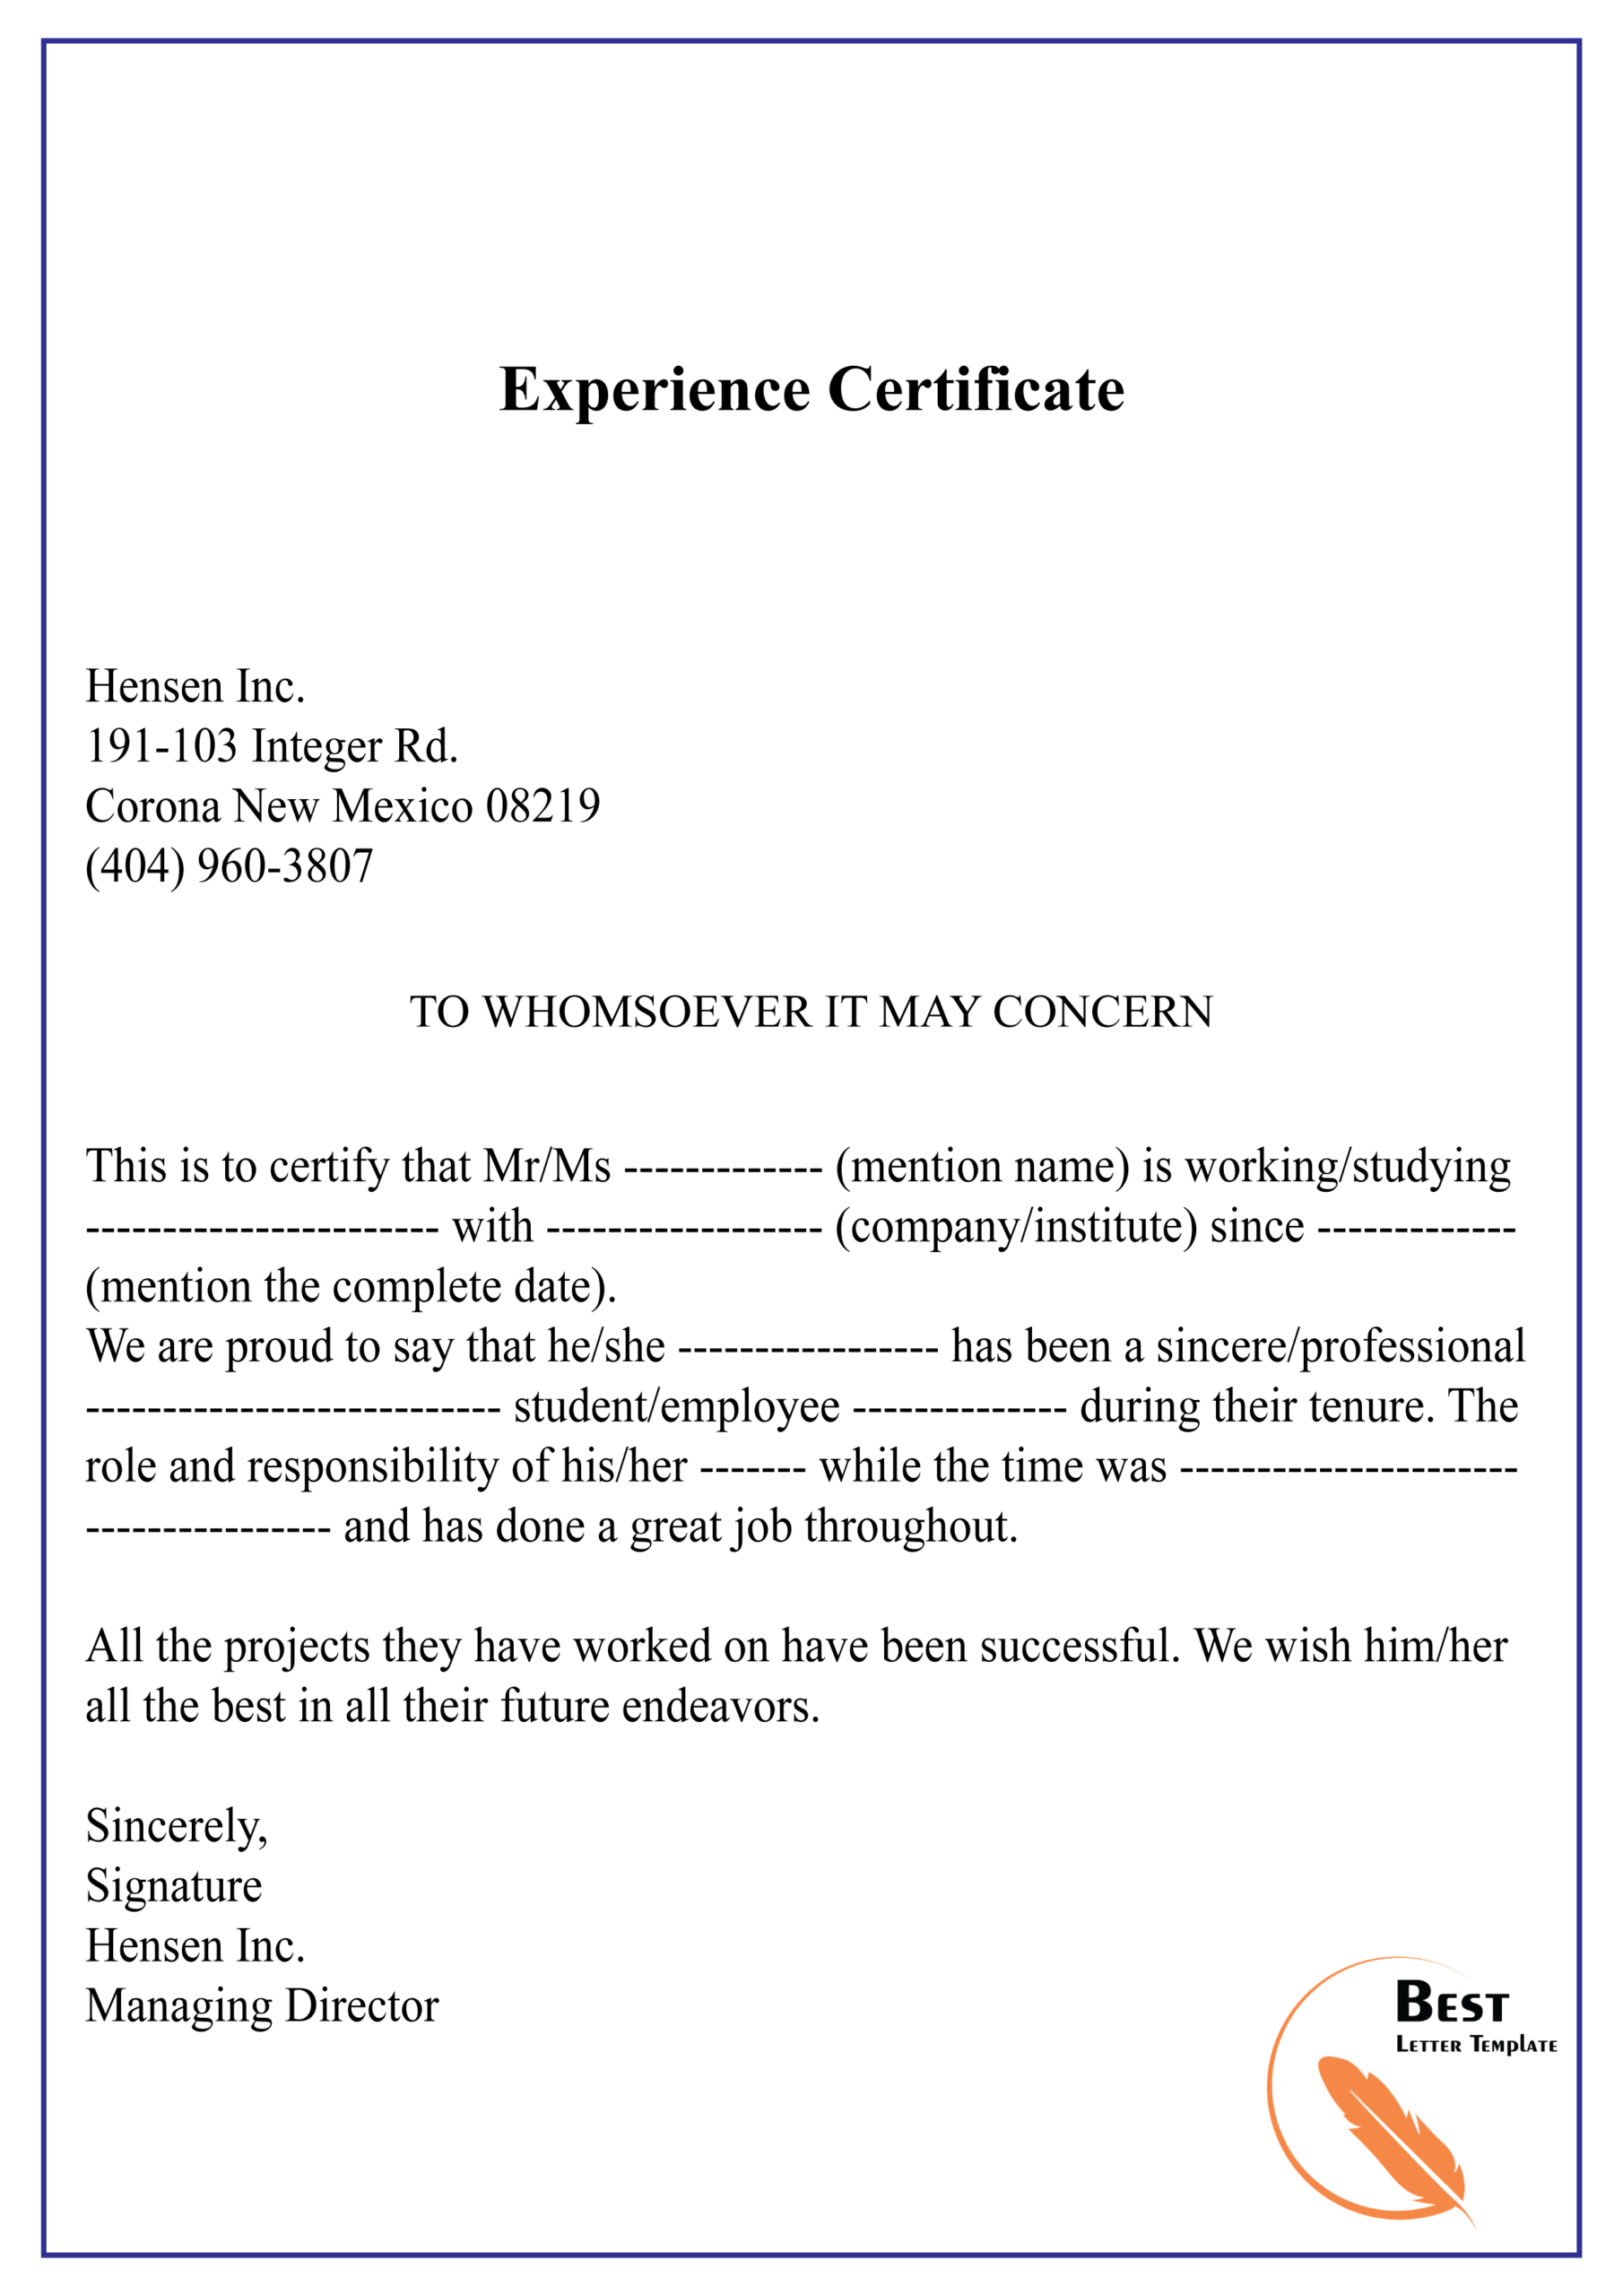 Experience Certificate 01 | Best Letter Template For Template Of Experience Certificate